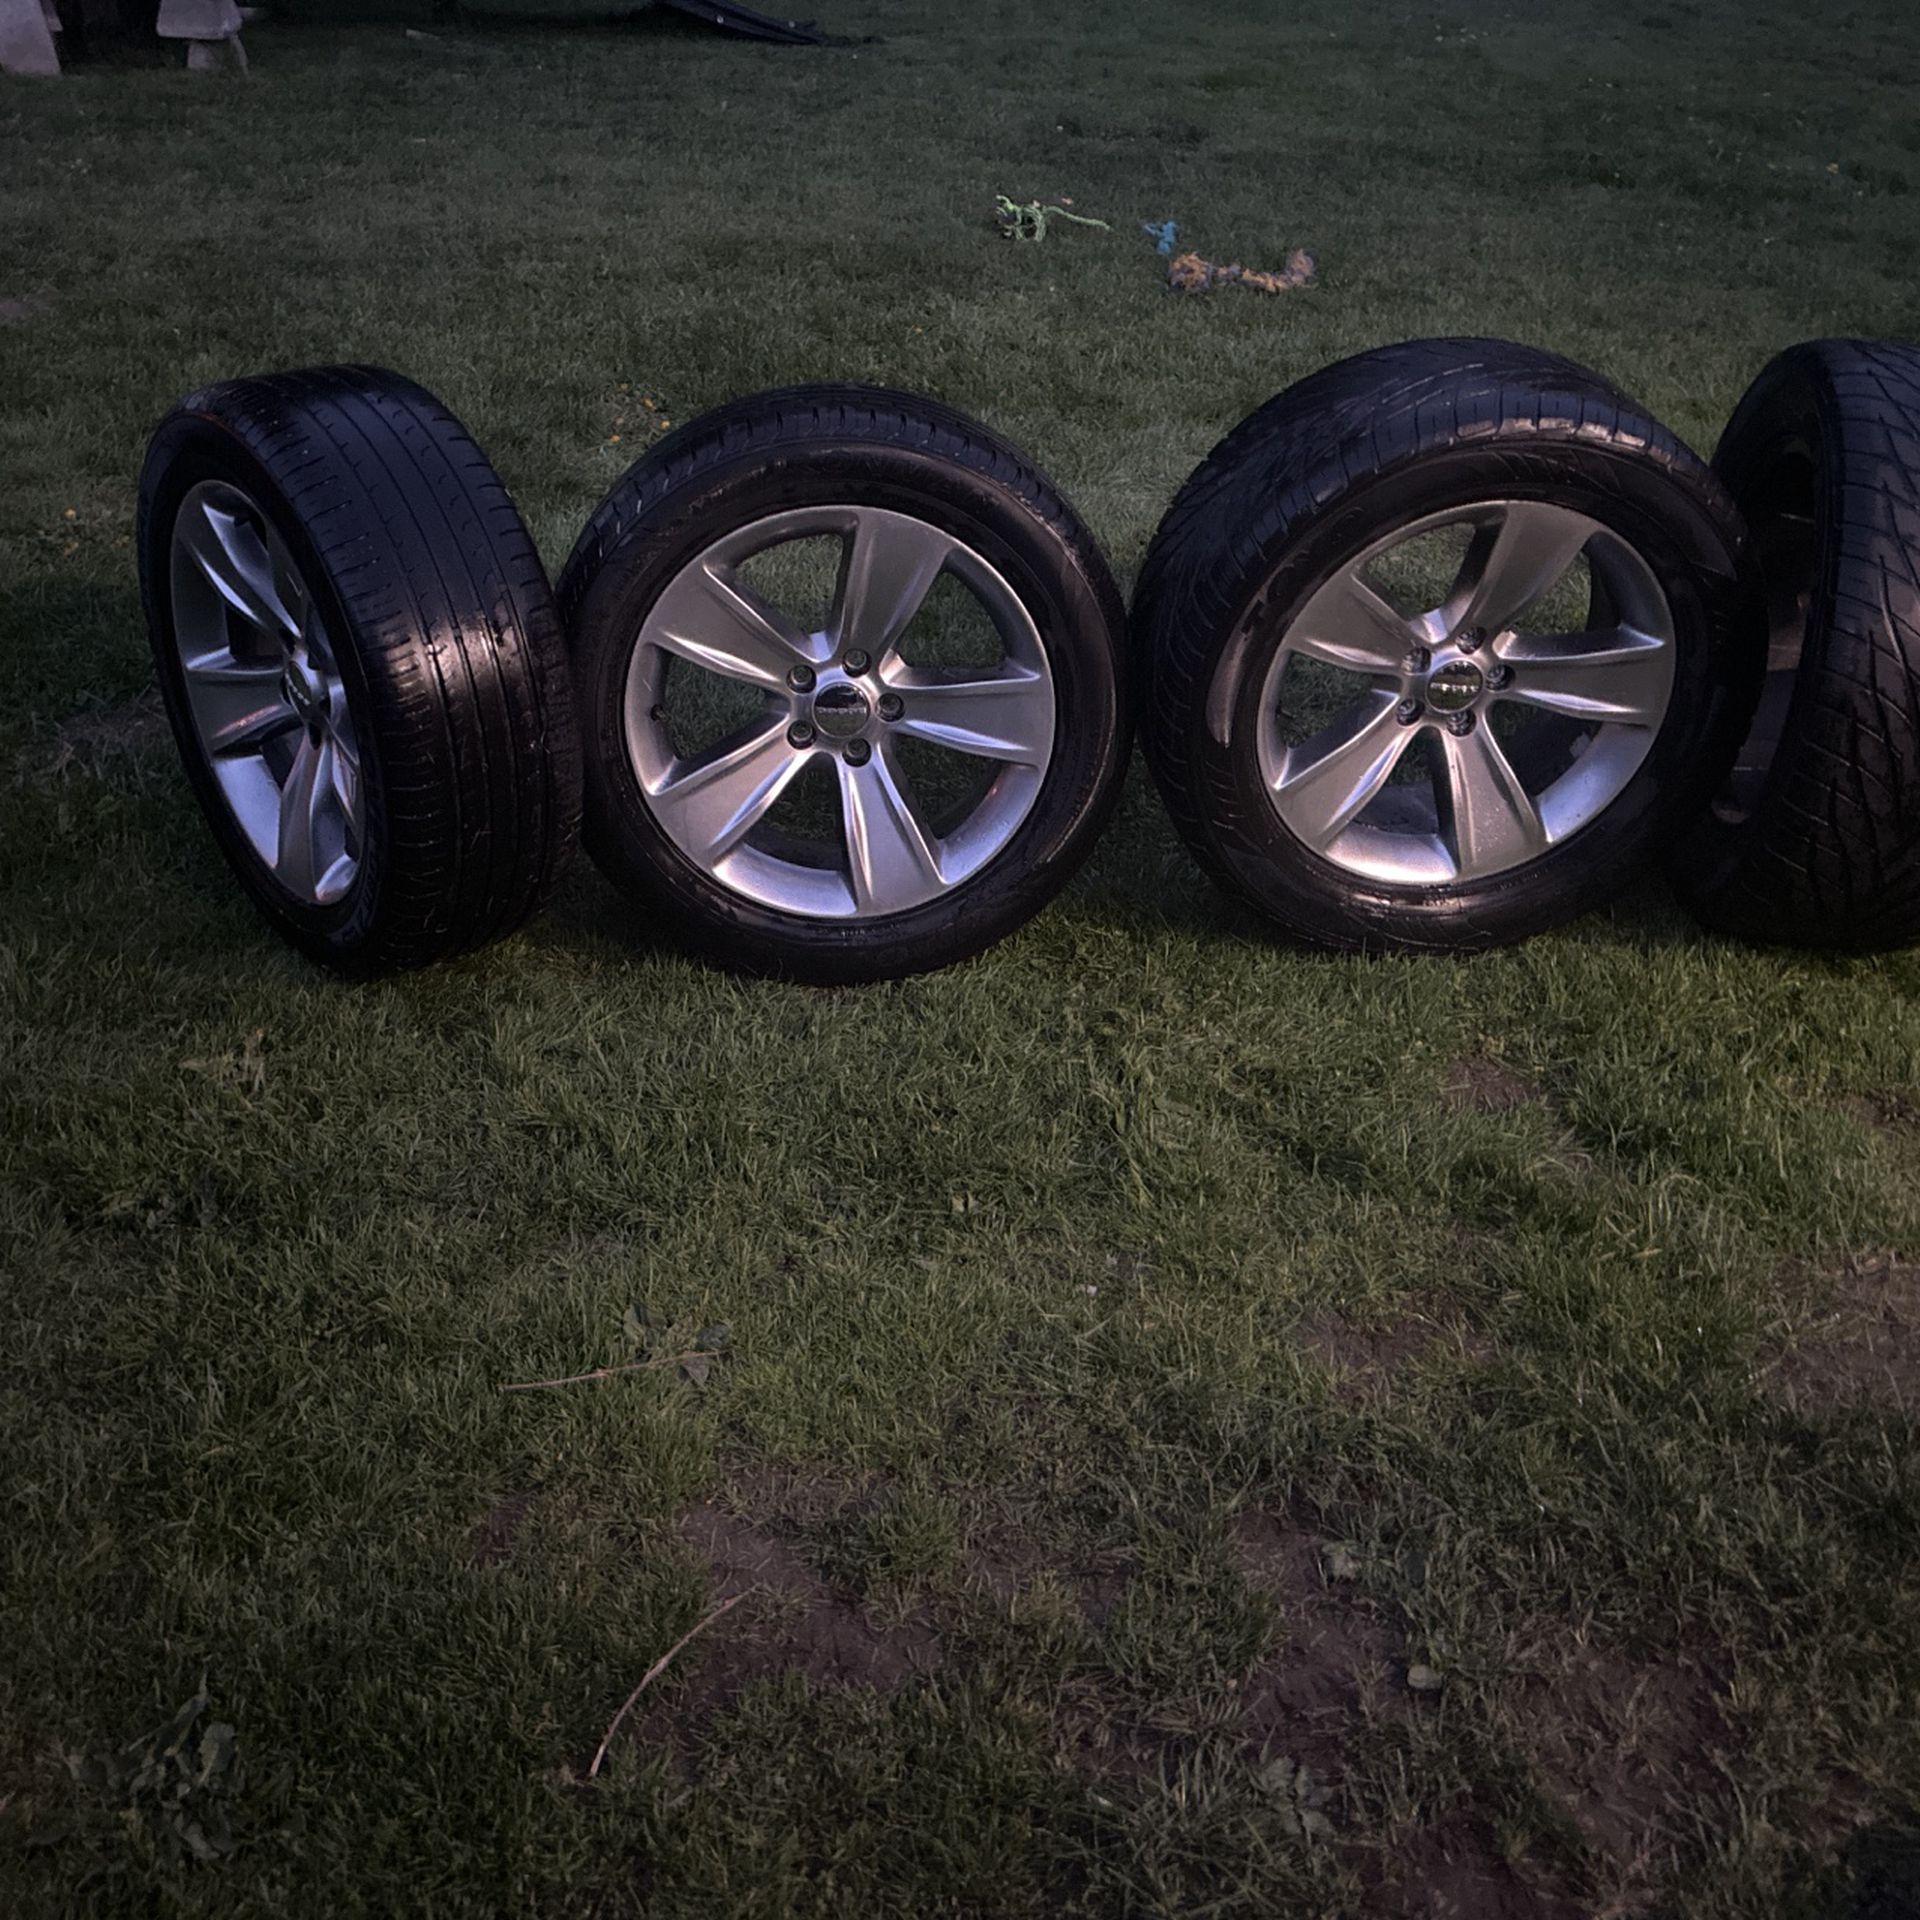 5x115 2015 Charger Wheels